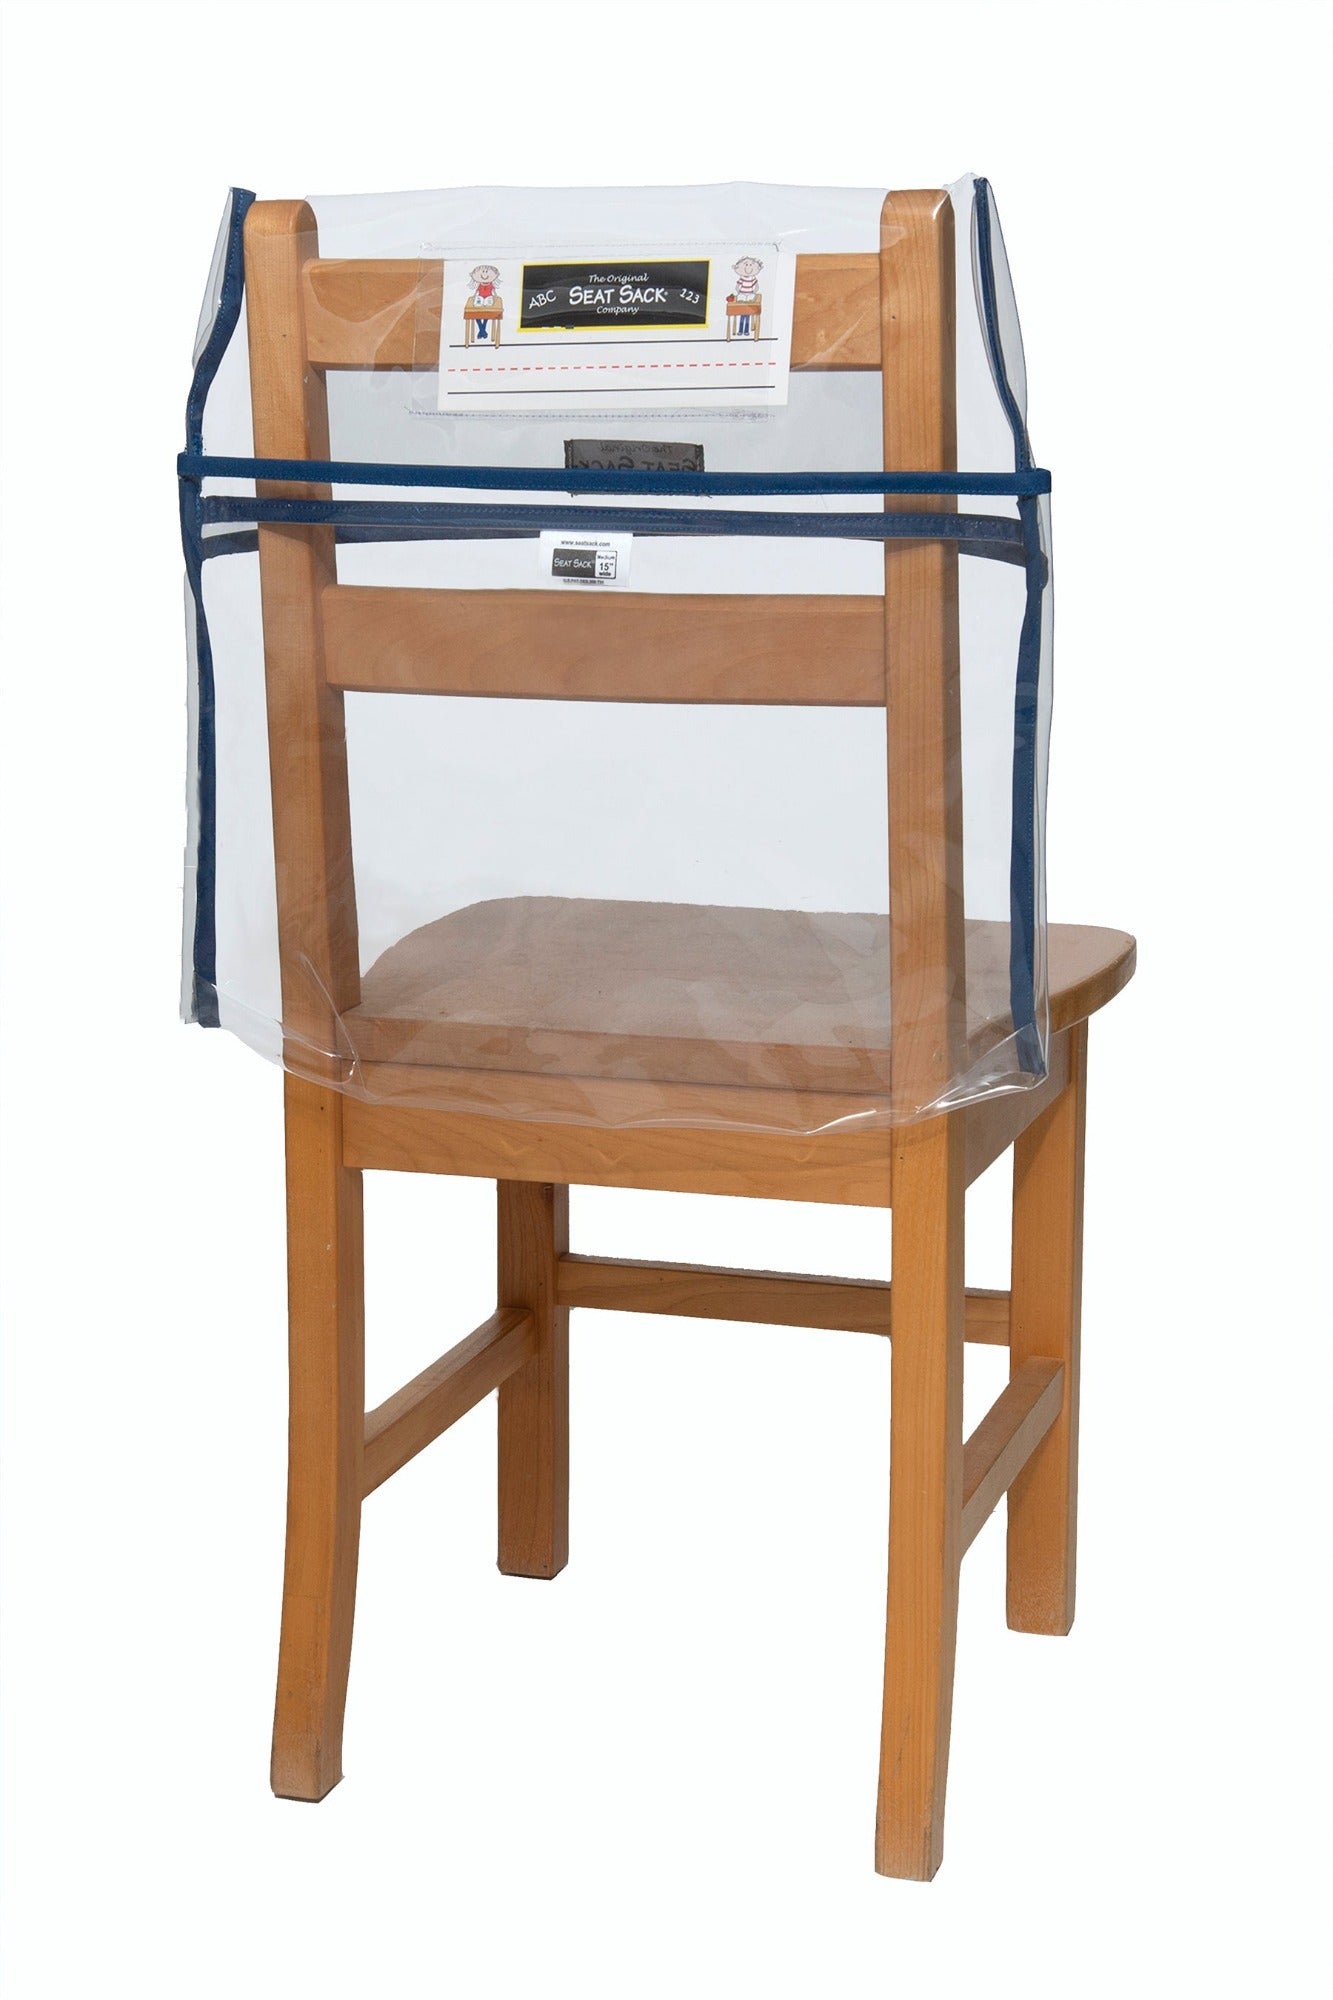 Clear Seat Sack slides onto the back of a chair for instant storage of books, school supplies and more. Meets security standards for safe schools. seat sack clear pocket